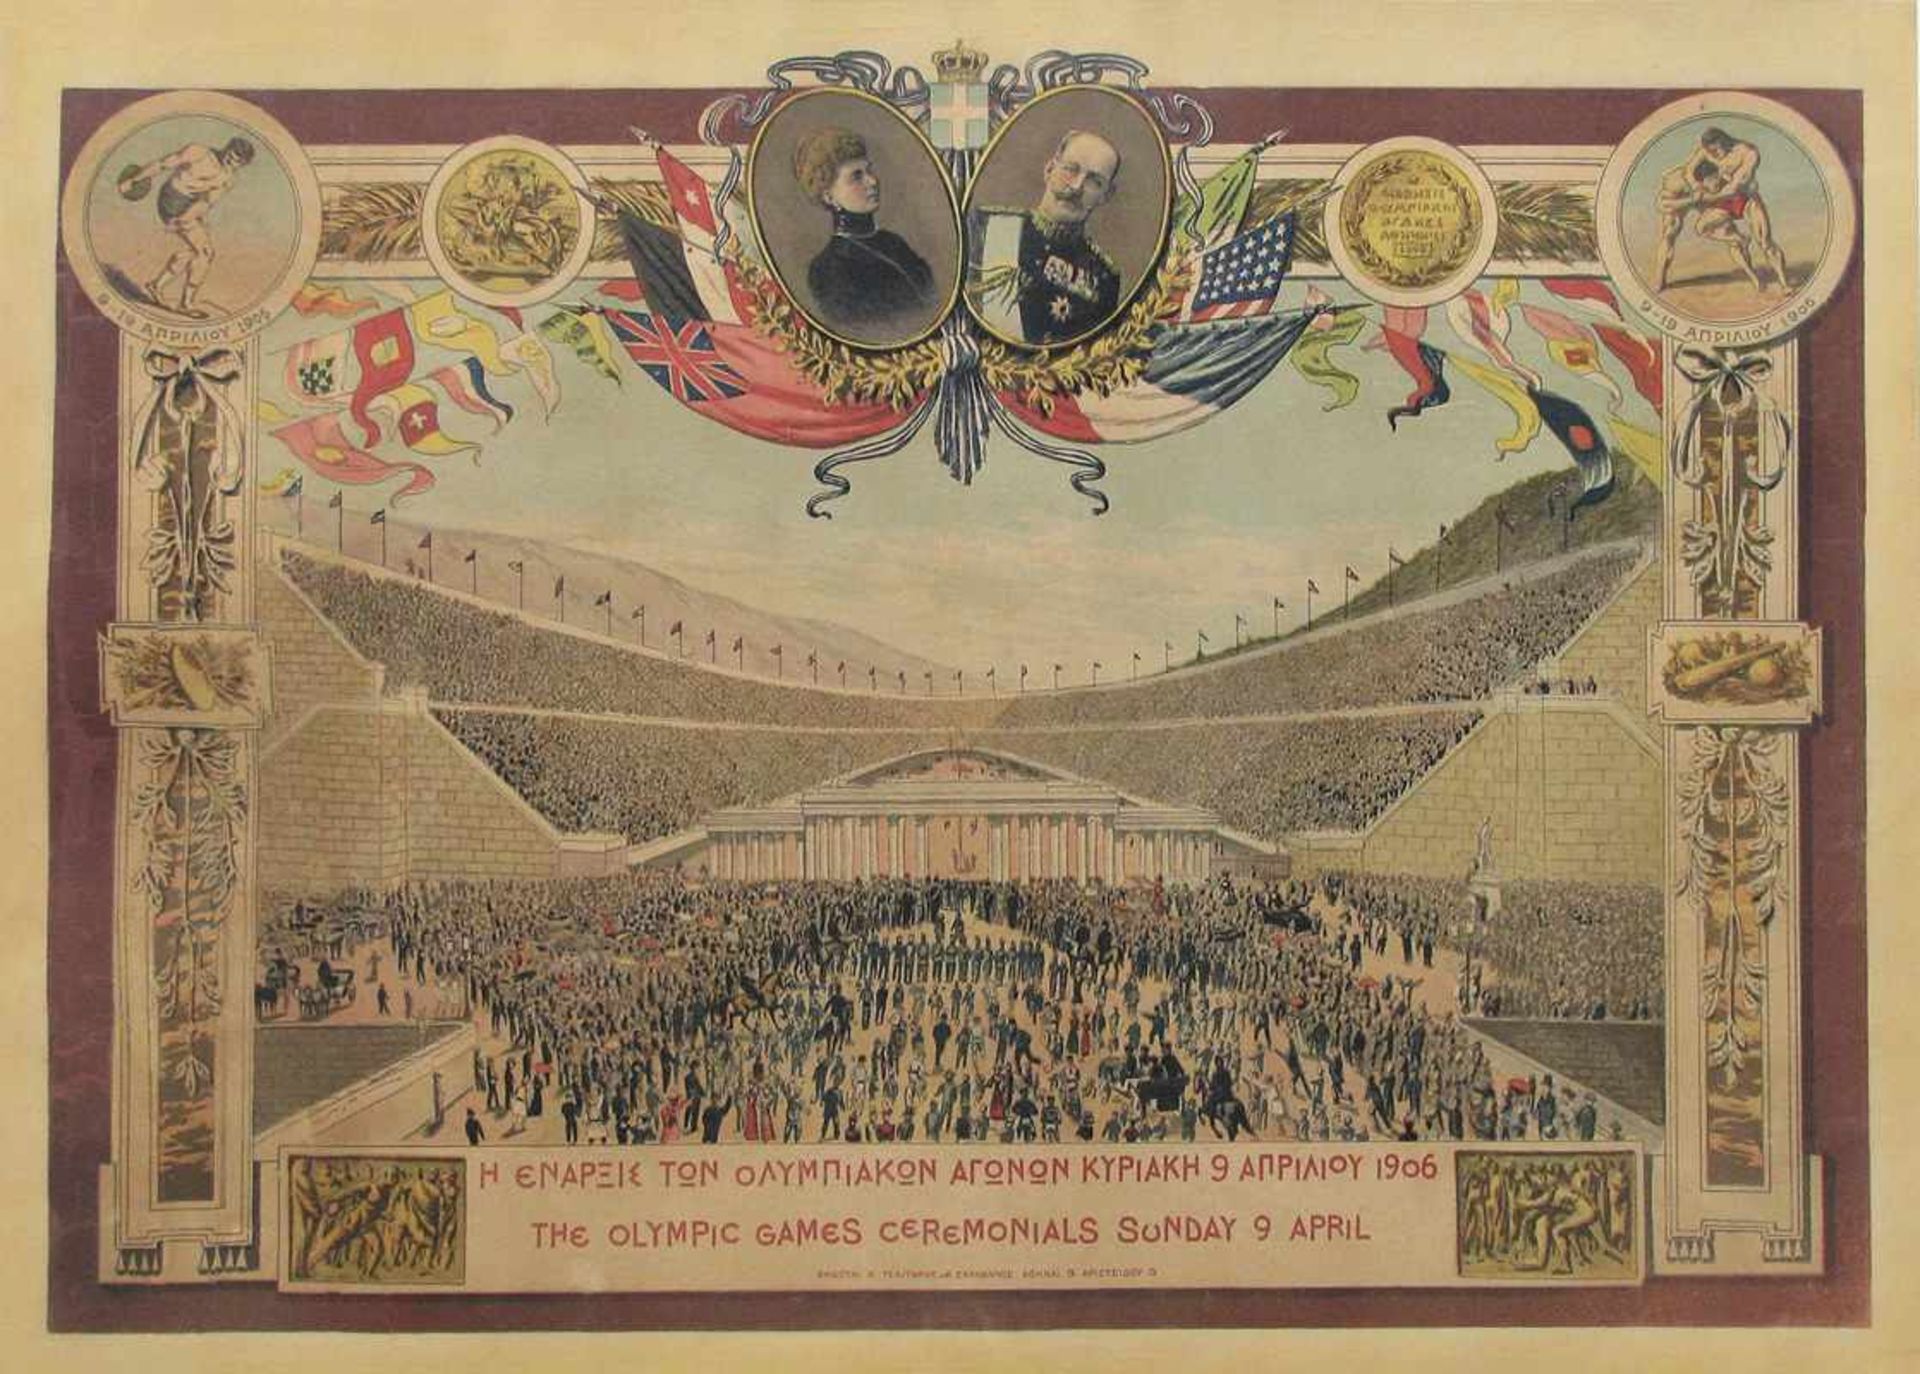 Poster Olympic Games Athen 1906 - Poster "The Olympic Games Ceremonials Sunday 9 April". 69 x 49 cm.